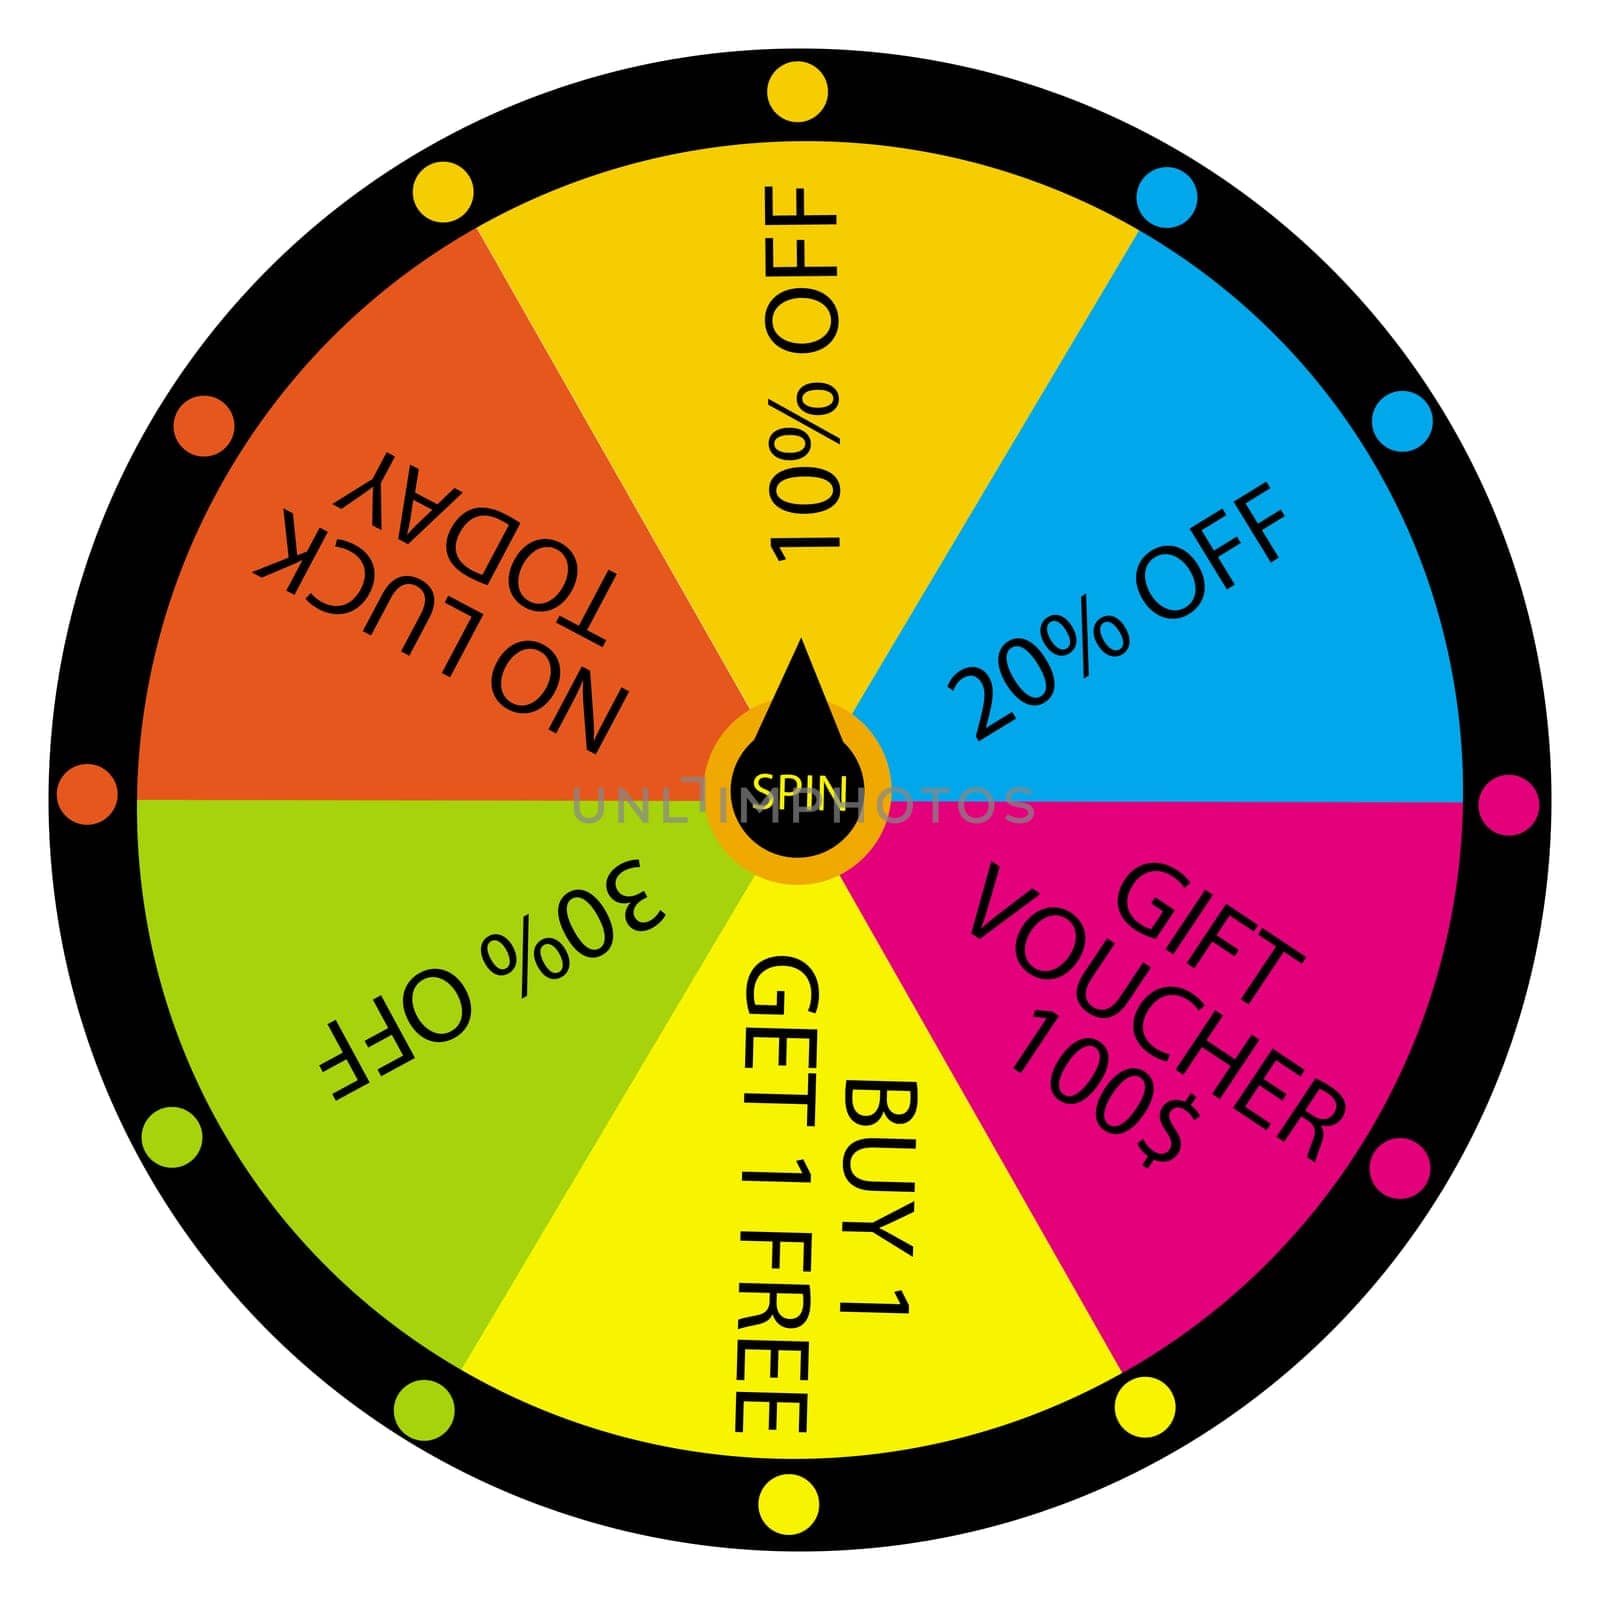 Sale offer concept with Fortune wheel.  Wheel of fortune with  sale,discount, voucher,  and promotion